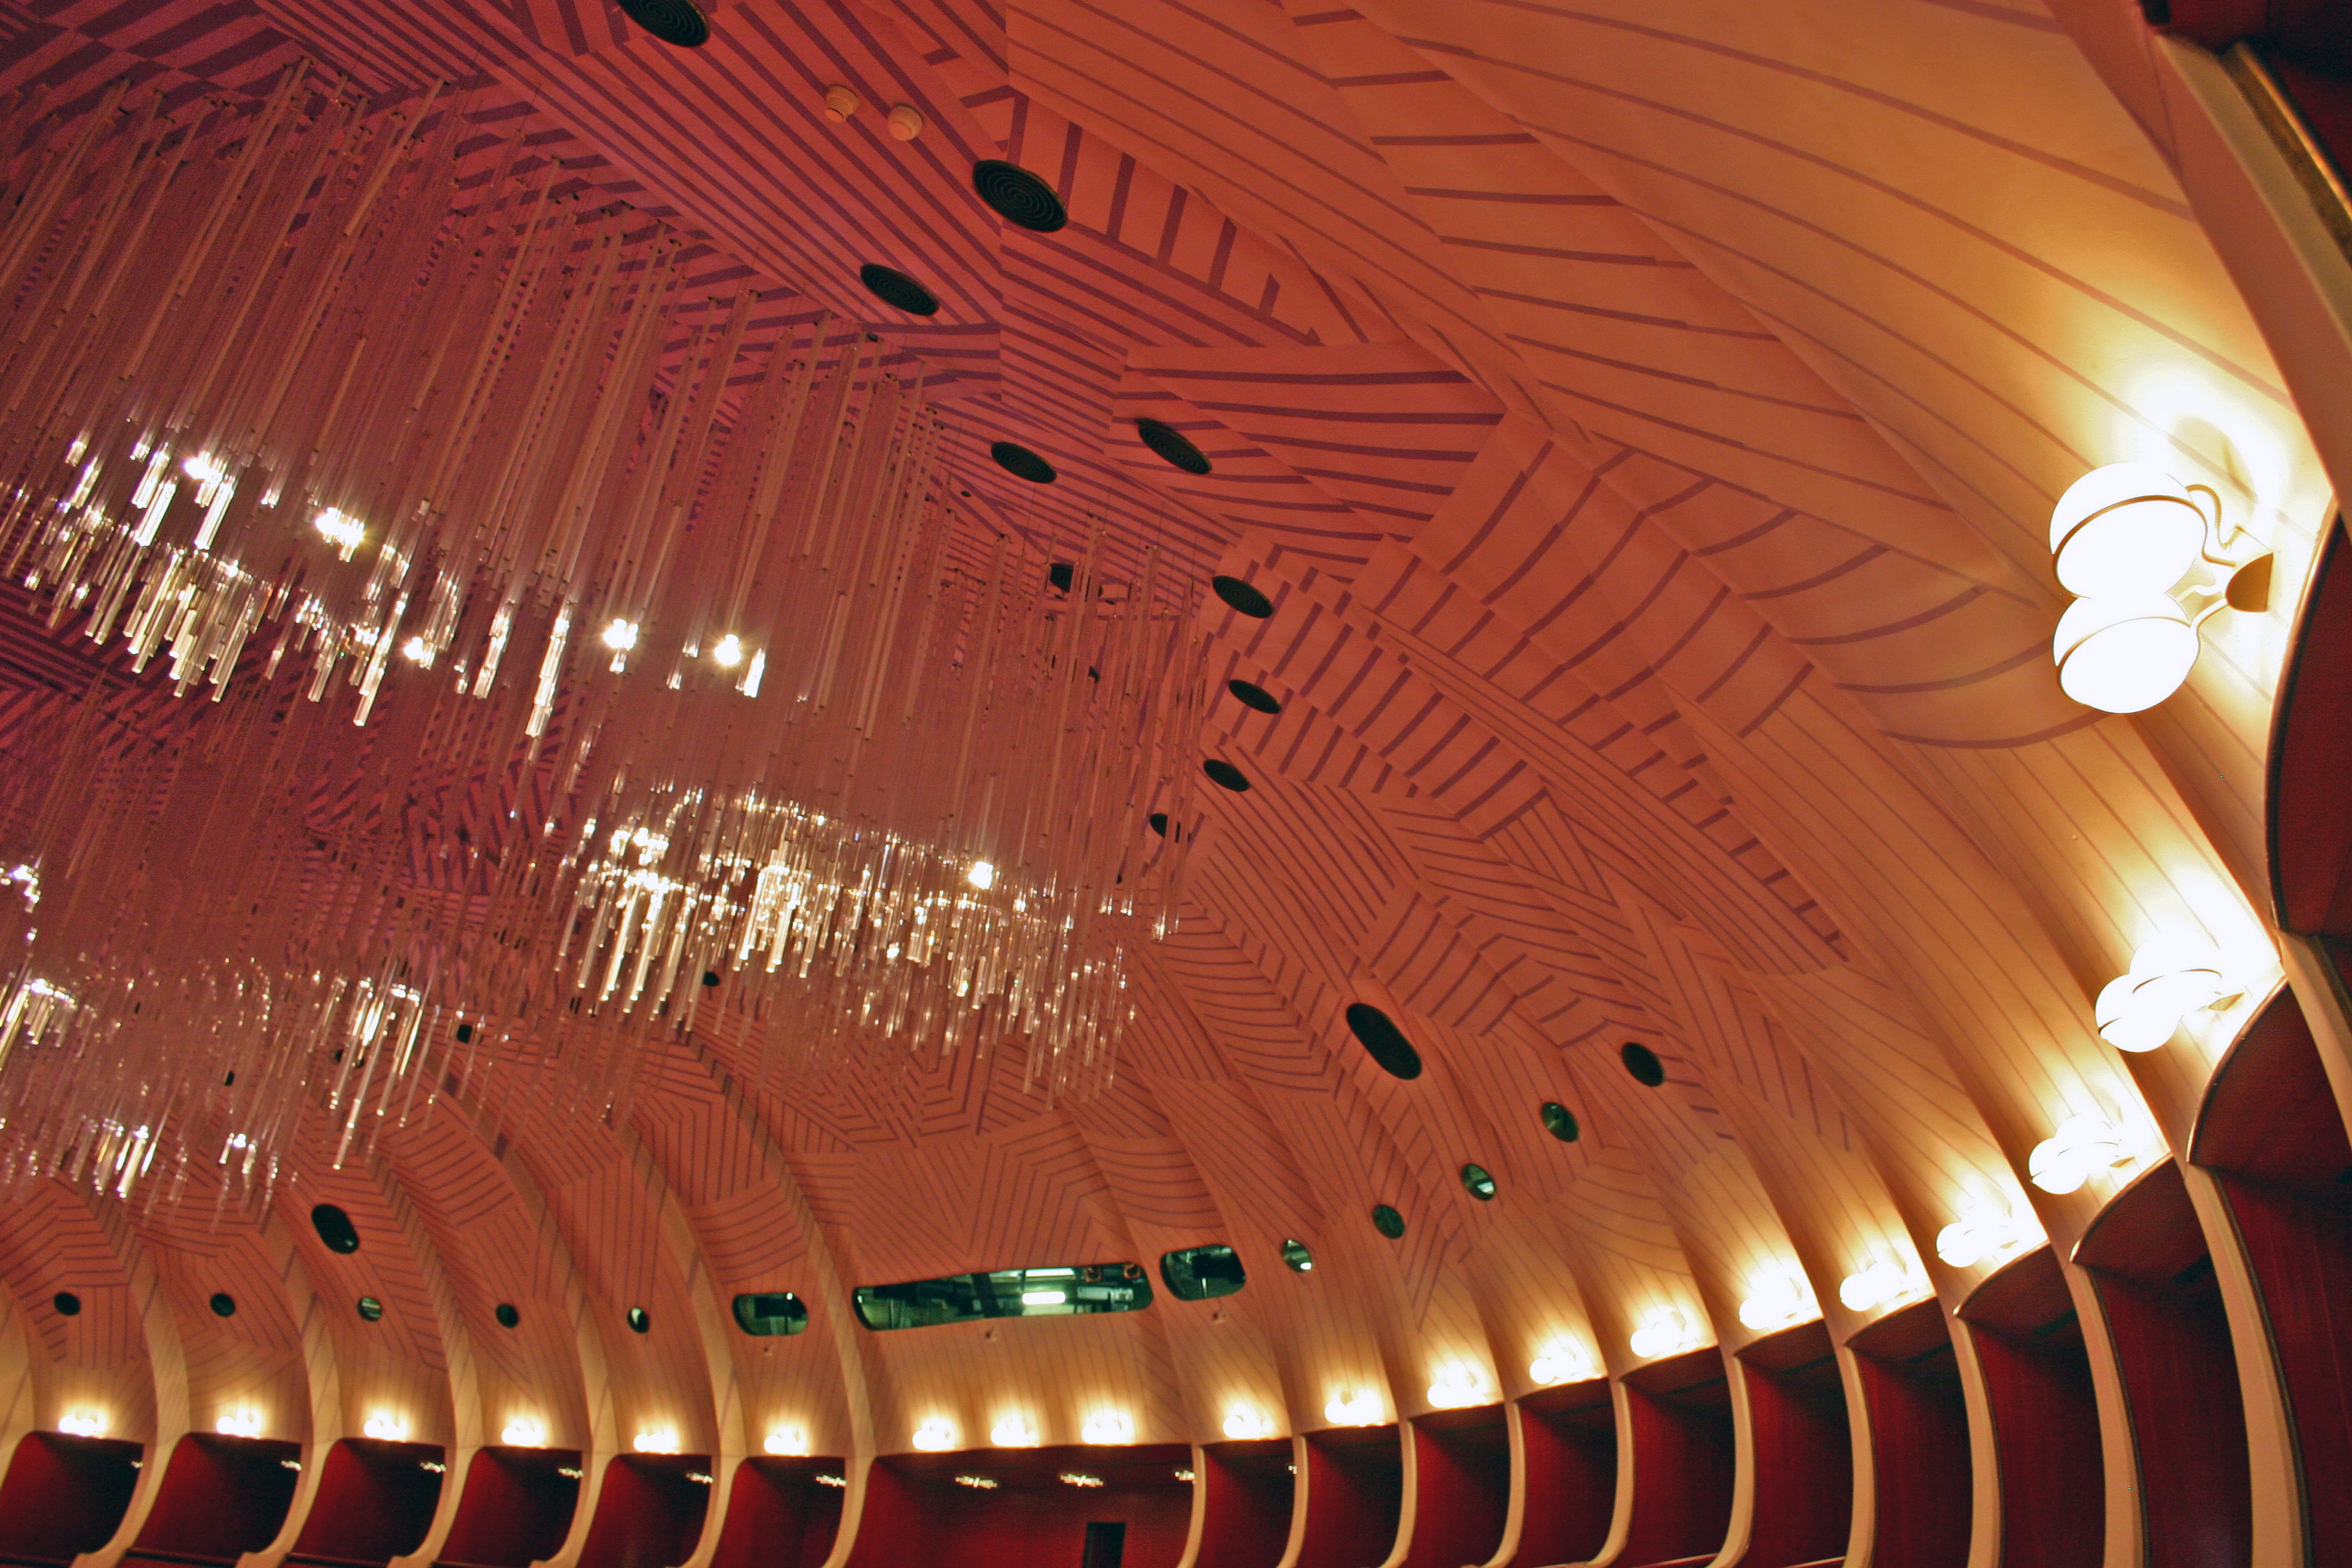 The wooden dome of the auditorium in its typical chromatic gradation from ivory to dark indigo